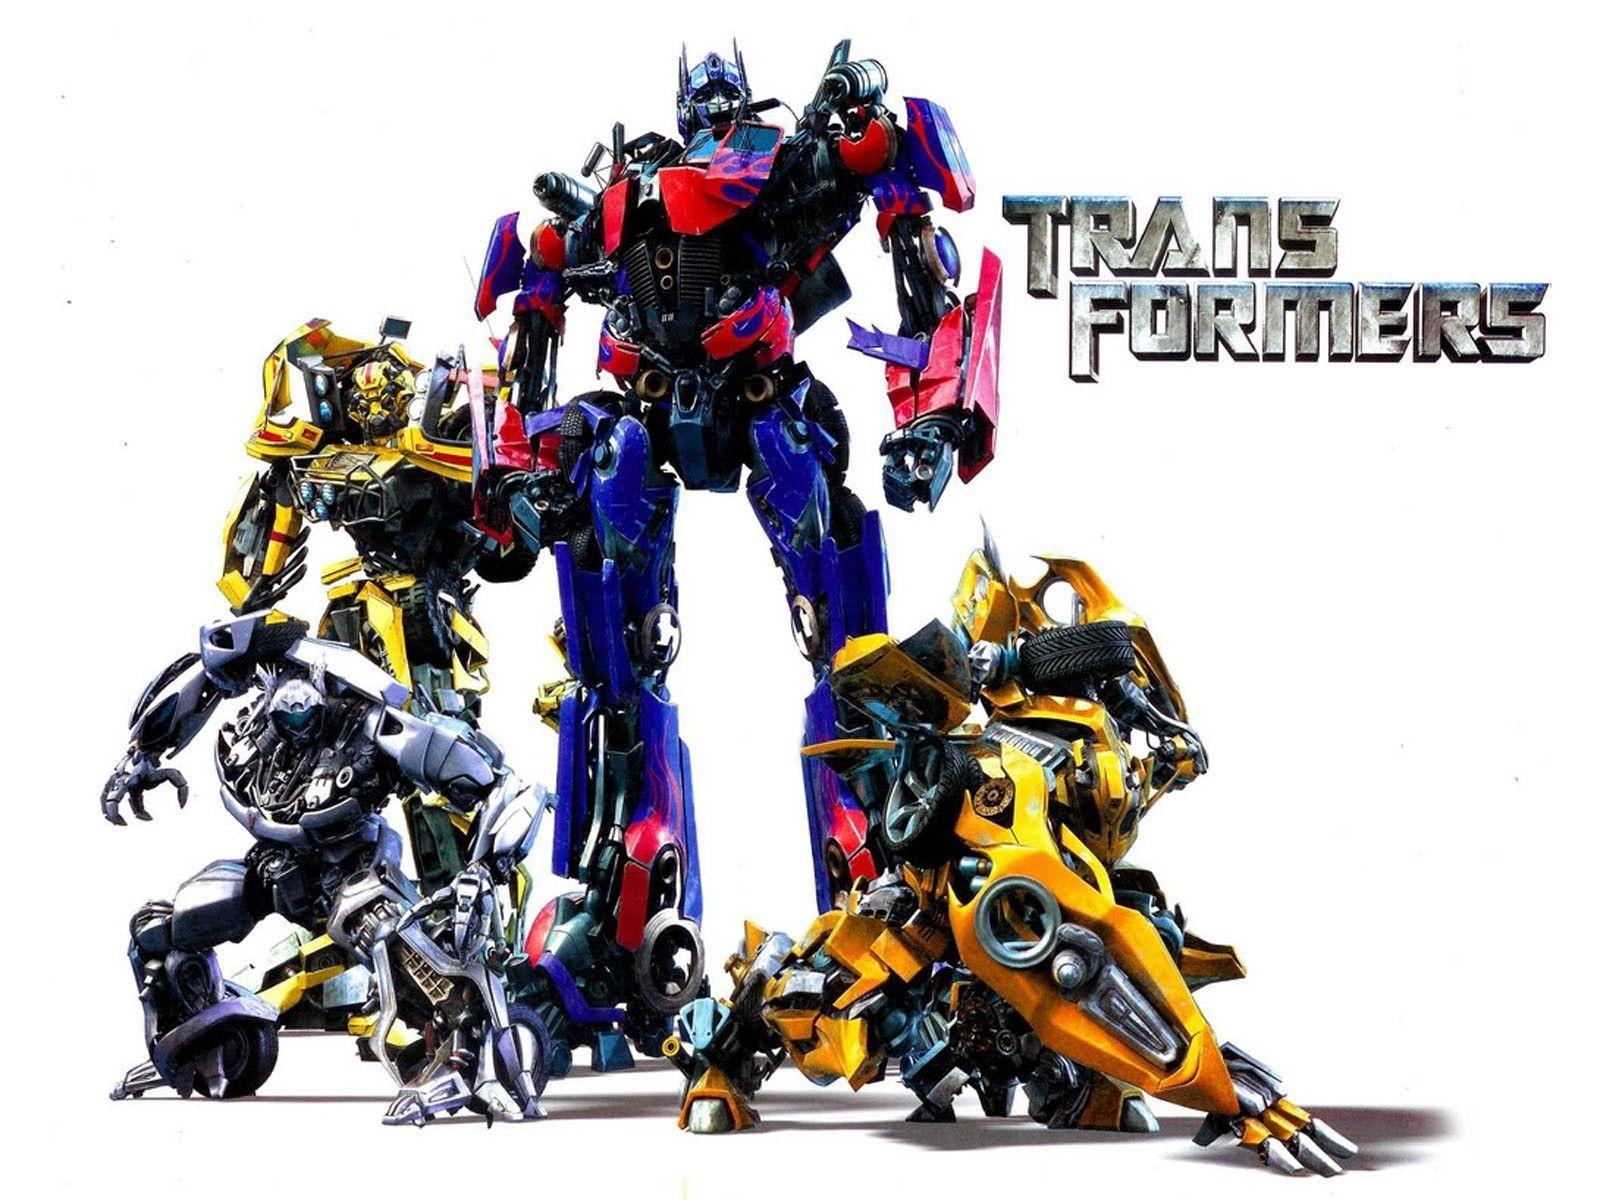 Stunning Transformer Autobot Wallpapers Picture